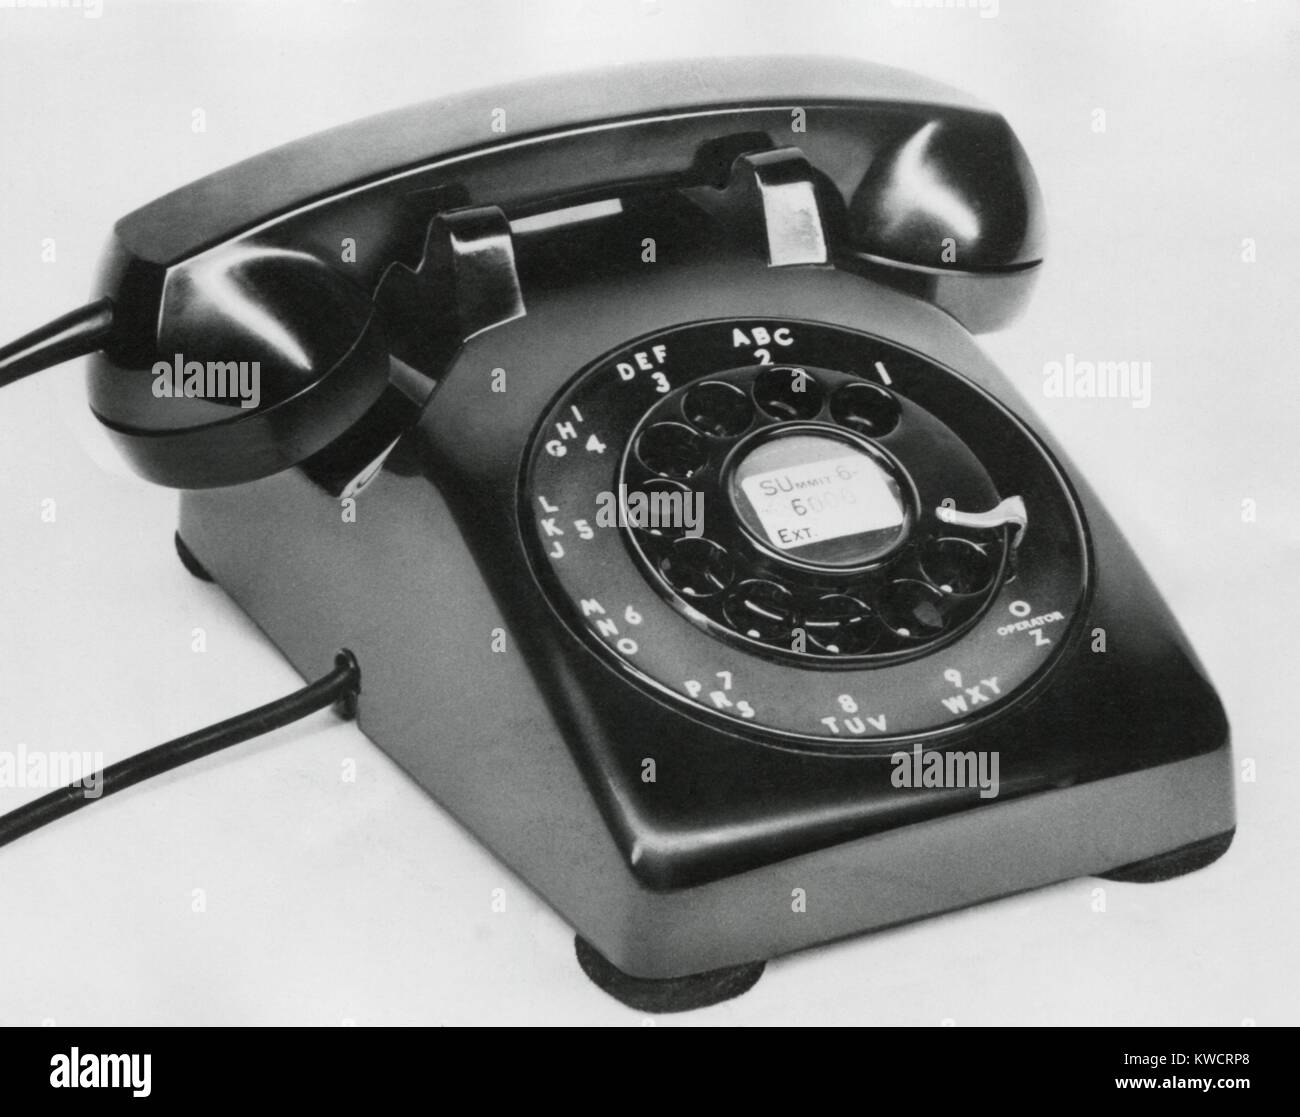 Western Electric model 500 Rotary dial telephone made in the 1950s. It remained the Bell System's standard model until 1984. It was designed by the firm of industrial designer Henry Dreyfuss. - (BSLOC 2015 1 226) Stock Photo